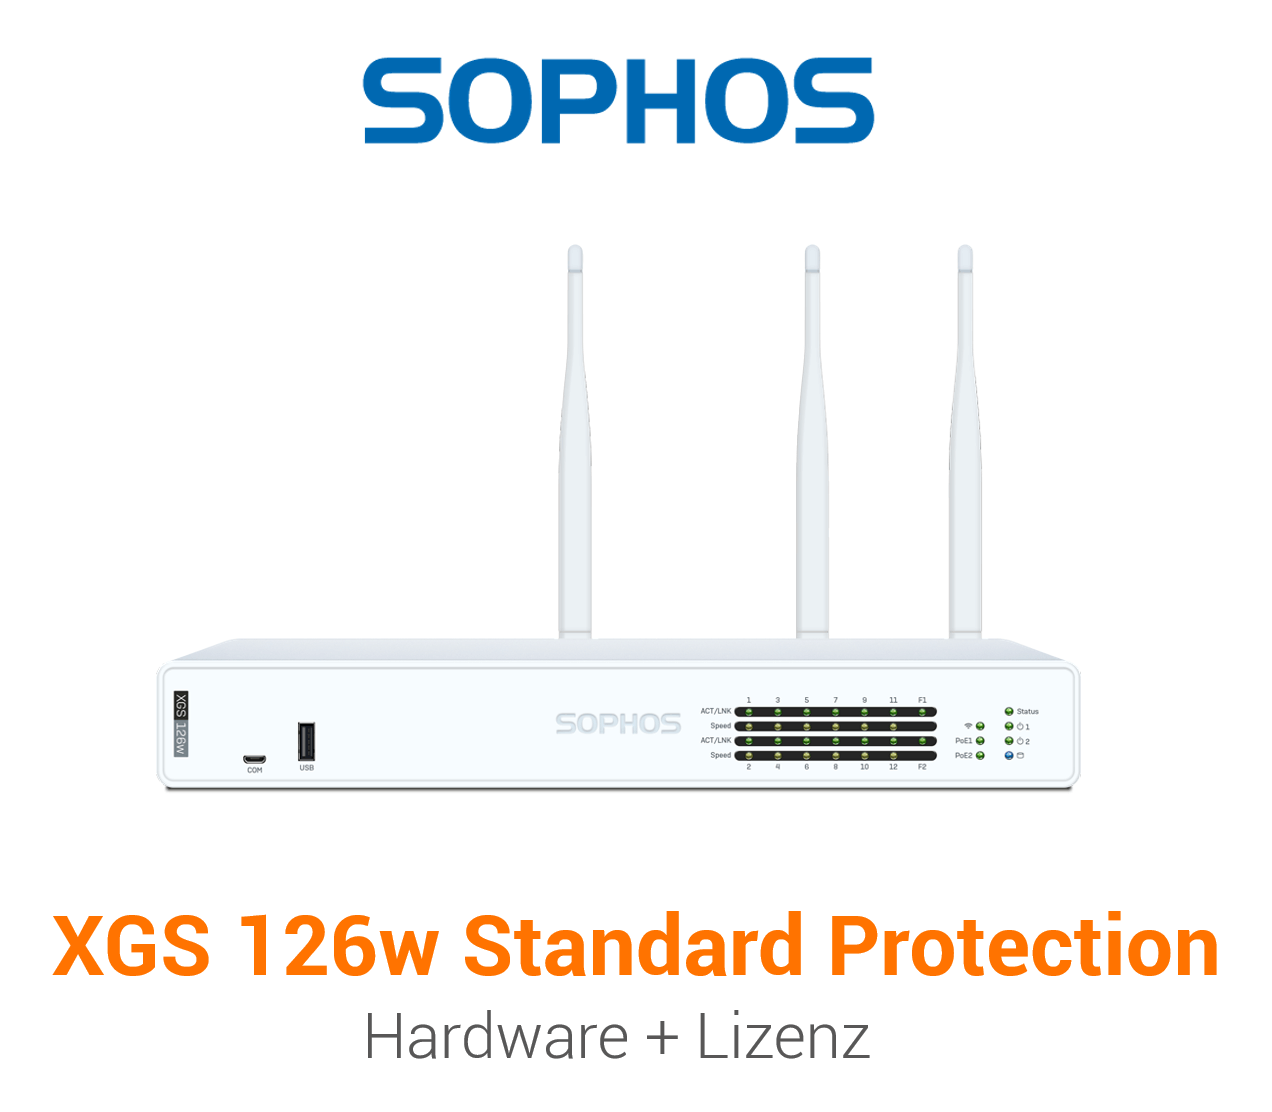 Sophos XGS 126w mit Standard Protection